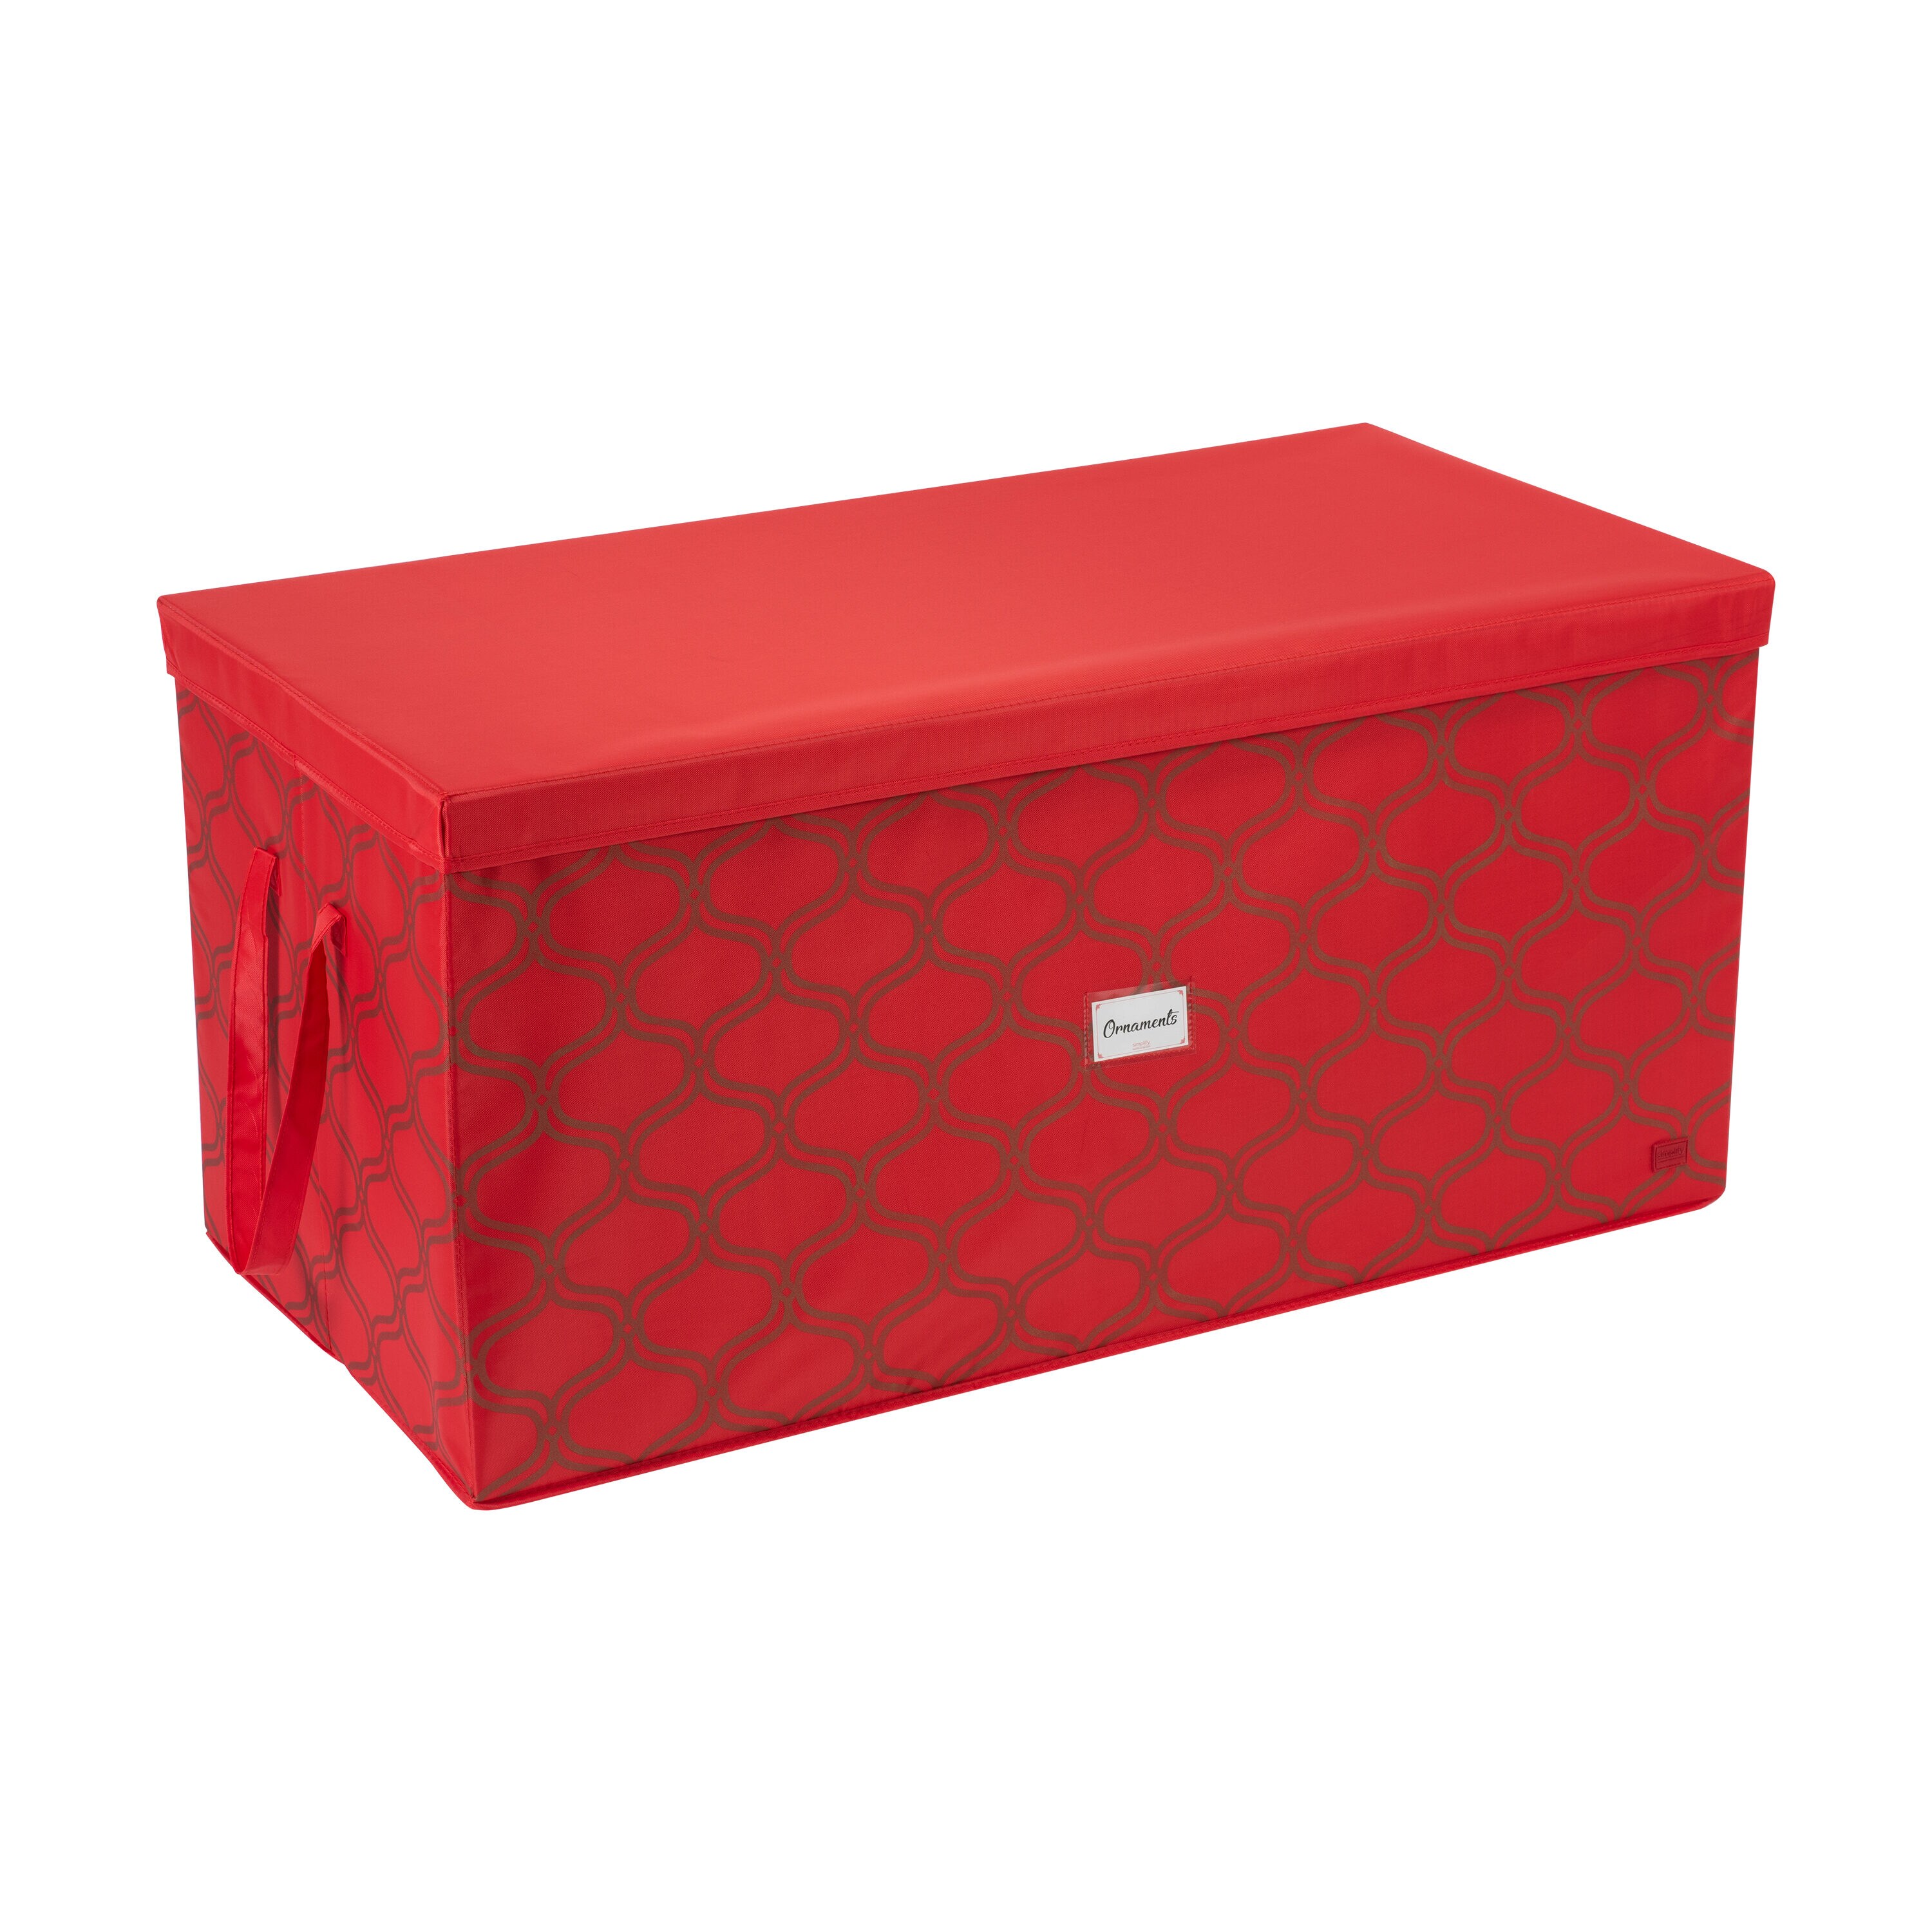 Simplify 19.5-in x 14.75-in 60-Compartment Red Cardboard